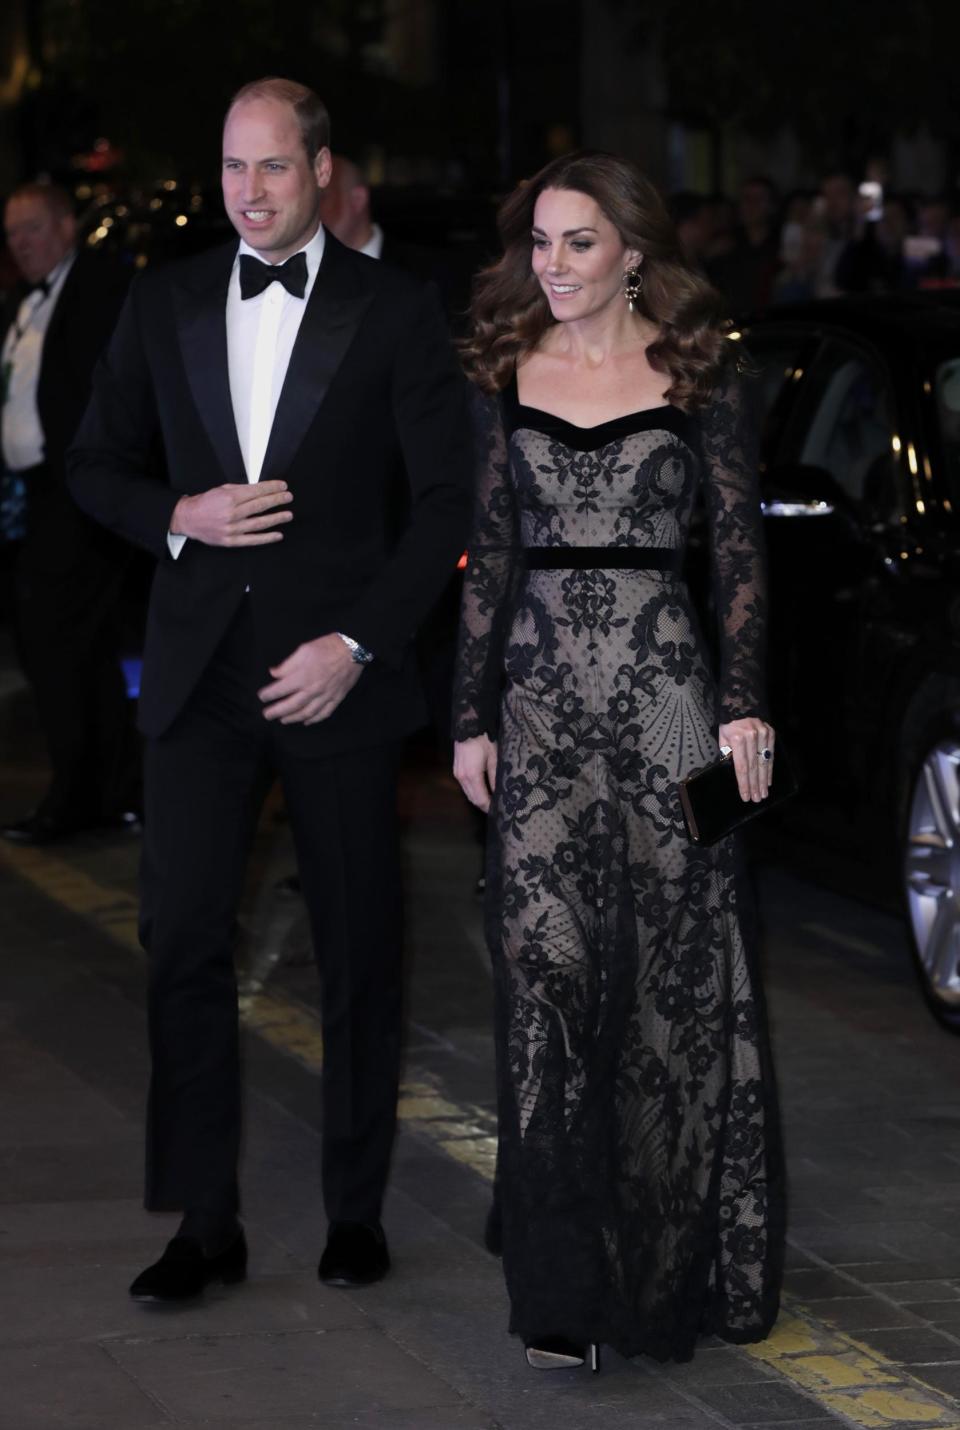 Kate Middleton Royal Variety Performance 2019 (Getty Images )